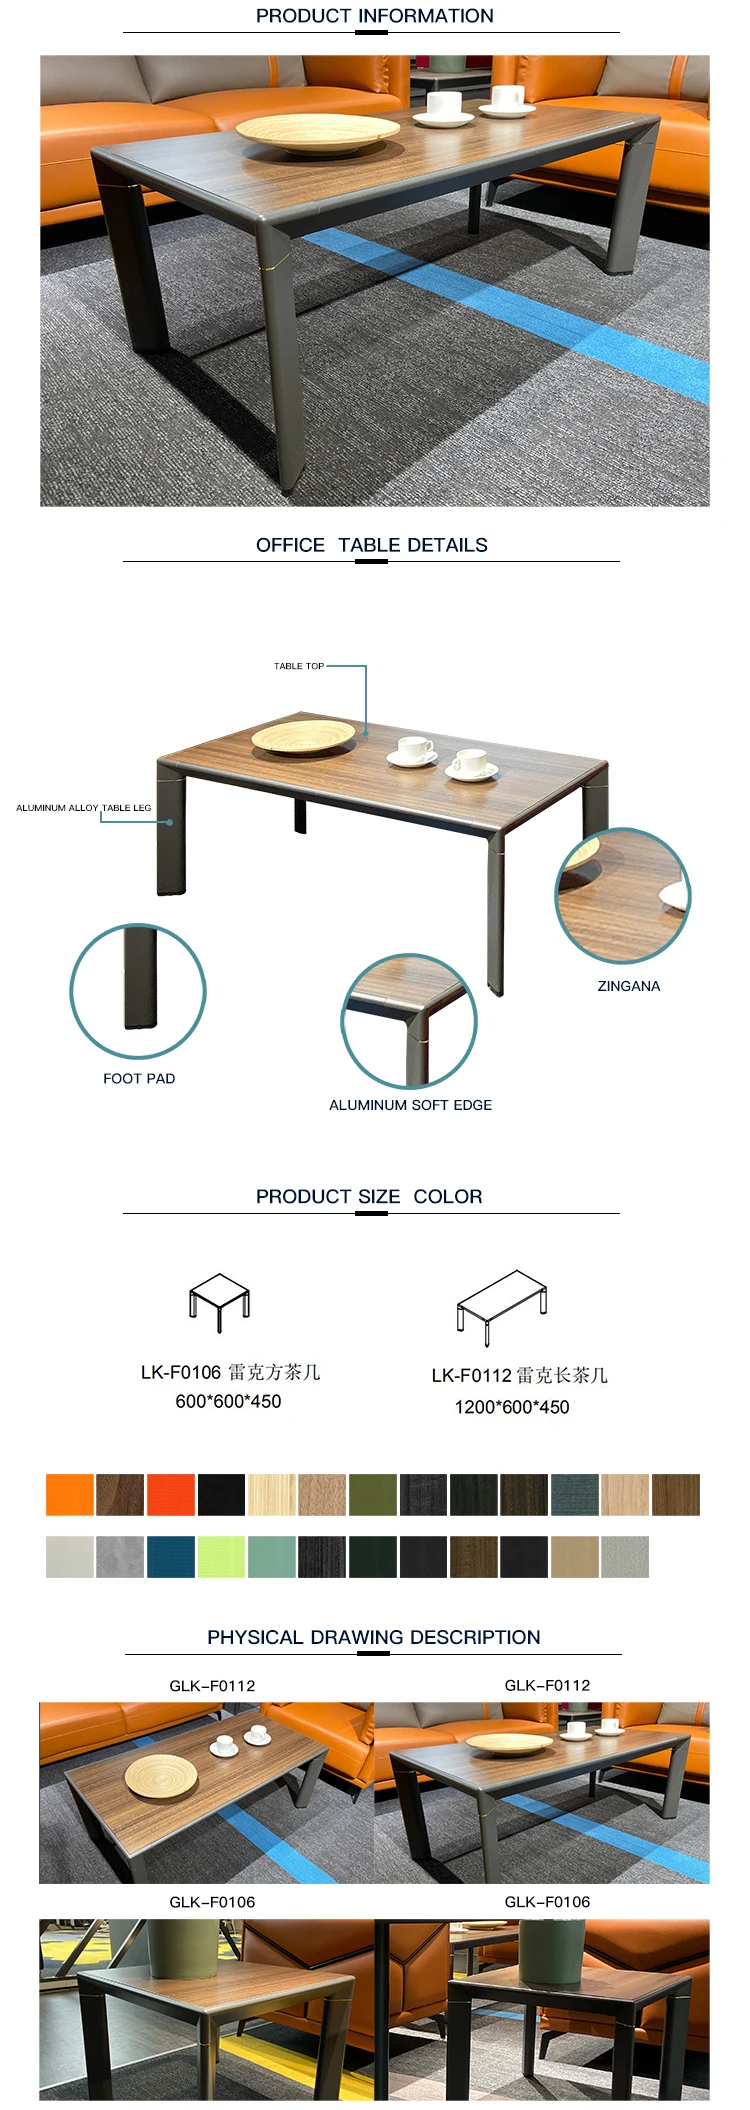 China supplier factory price Dious office furniture luxury modern wooden coffee table tea table